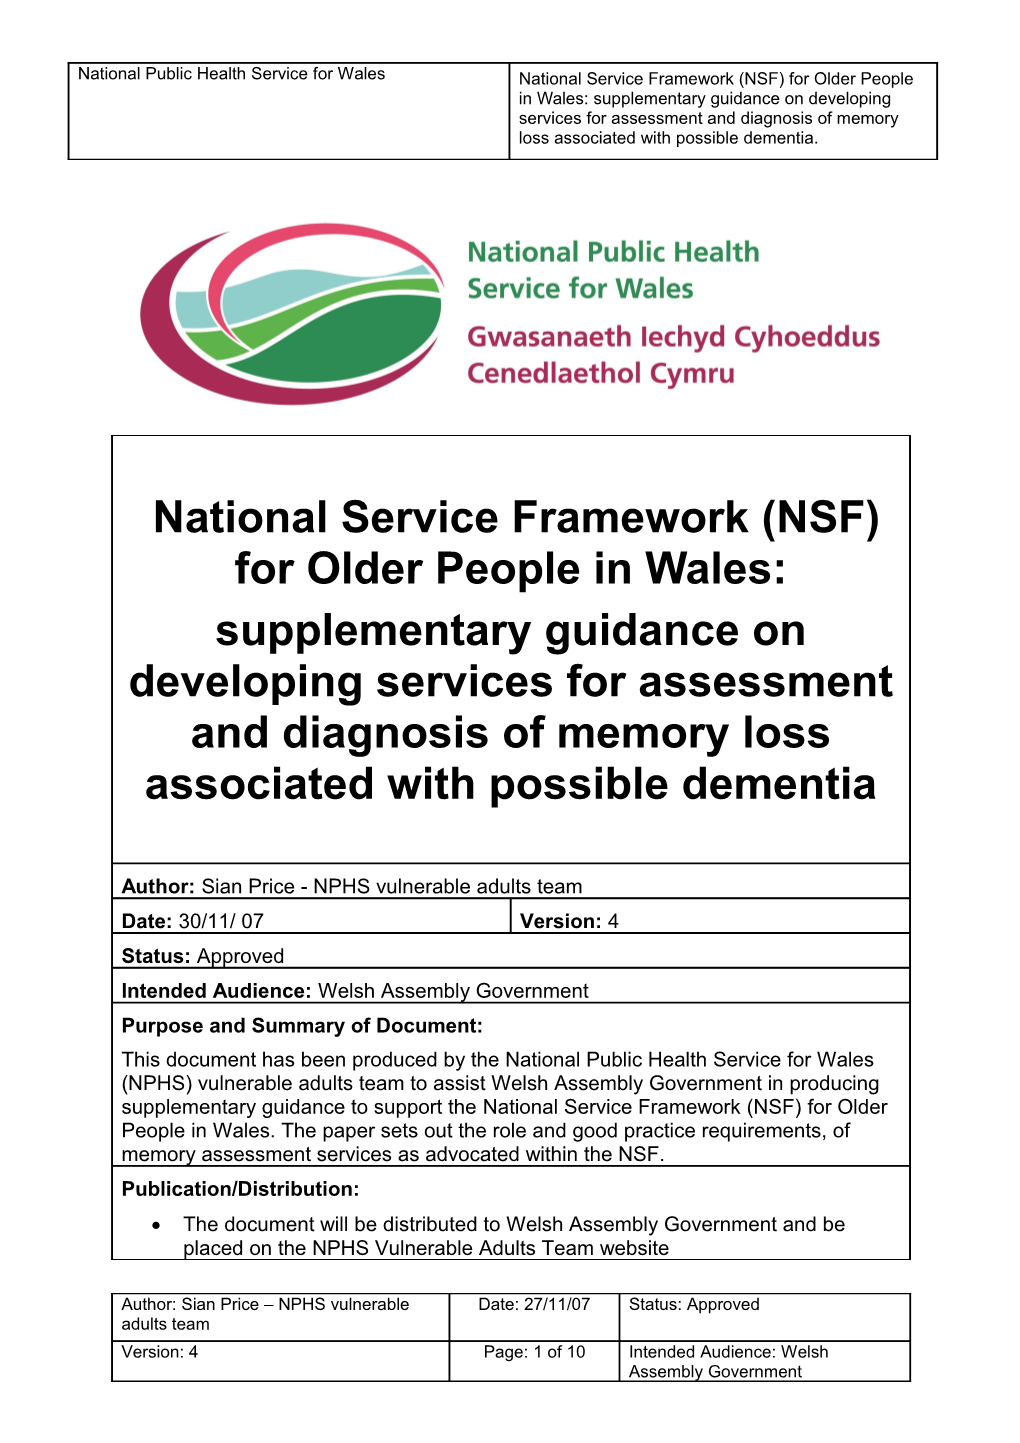 2007. National Public Health Service for Wales Background